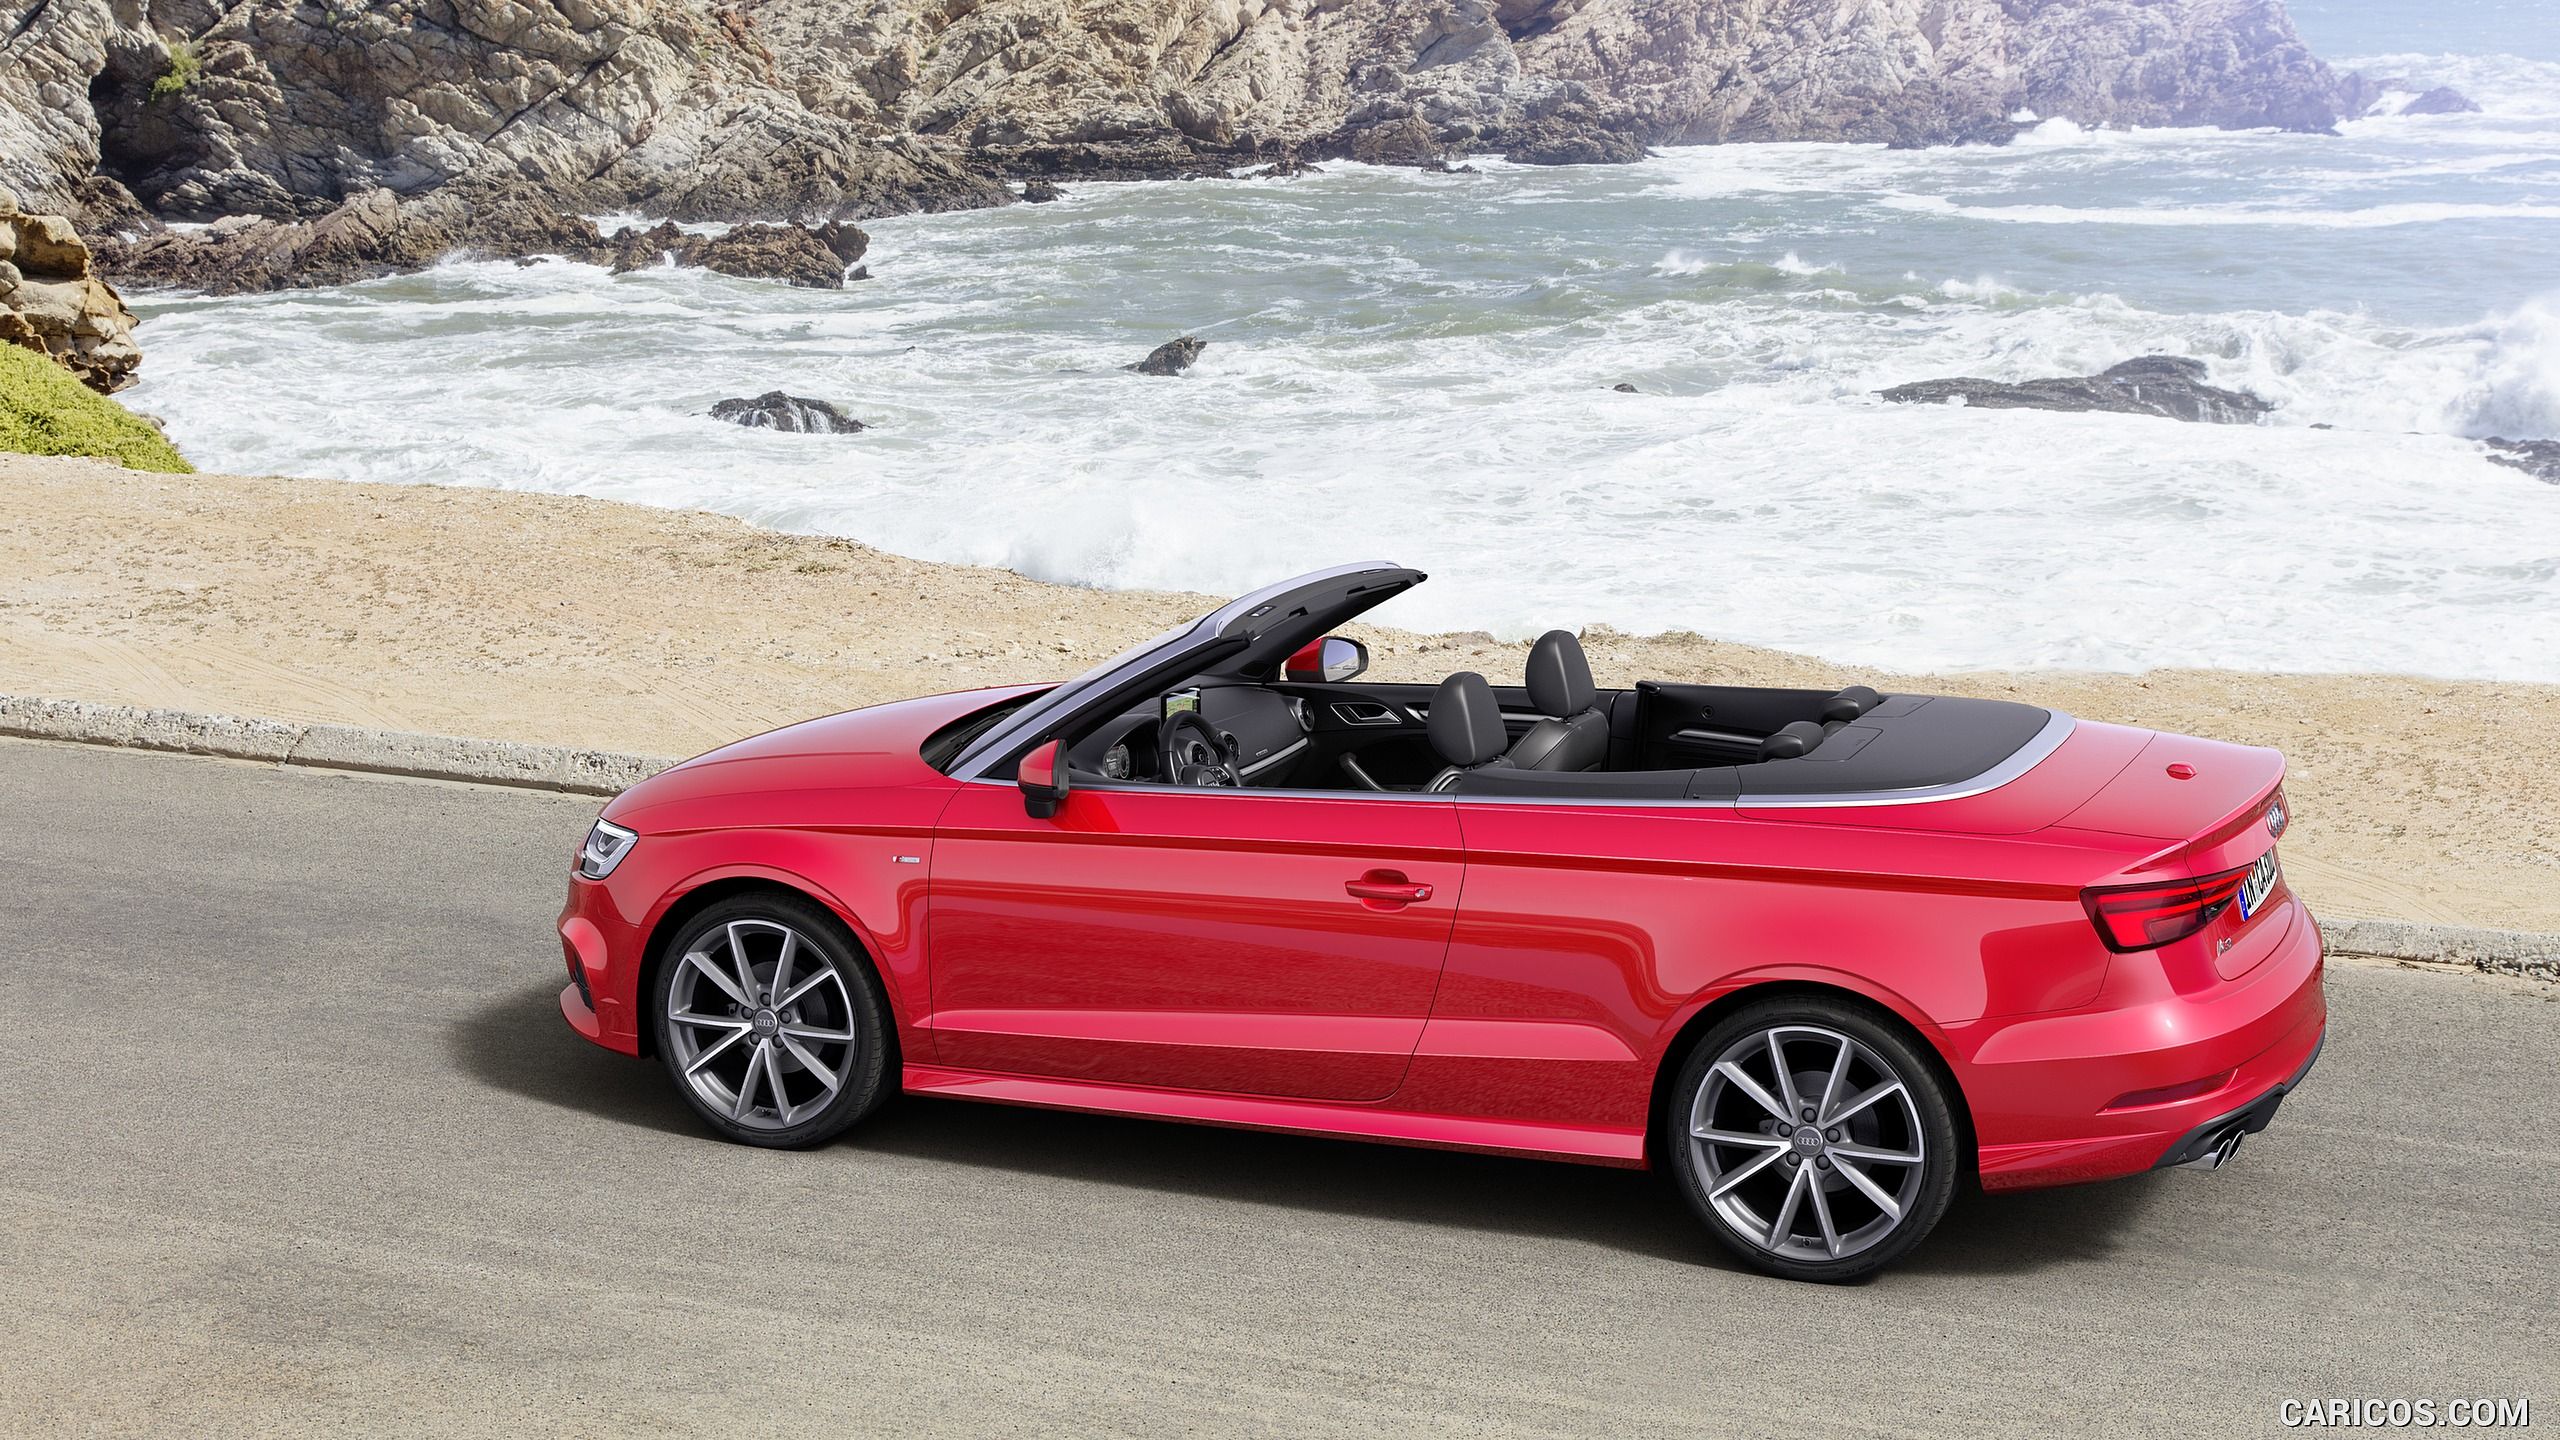 Audi A3 Cabriolet (Color: Misano Red). HD Wallpaper